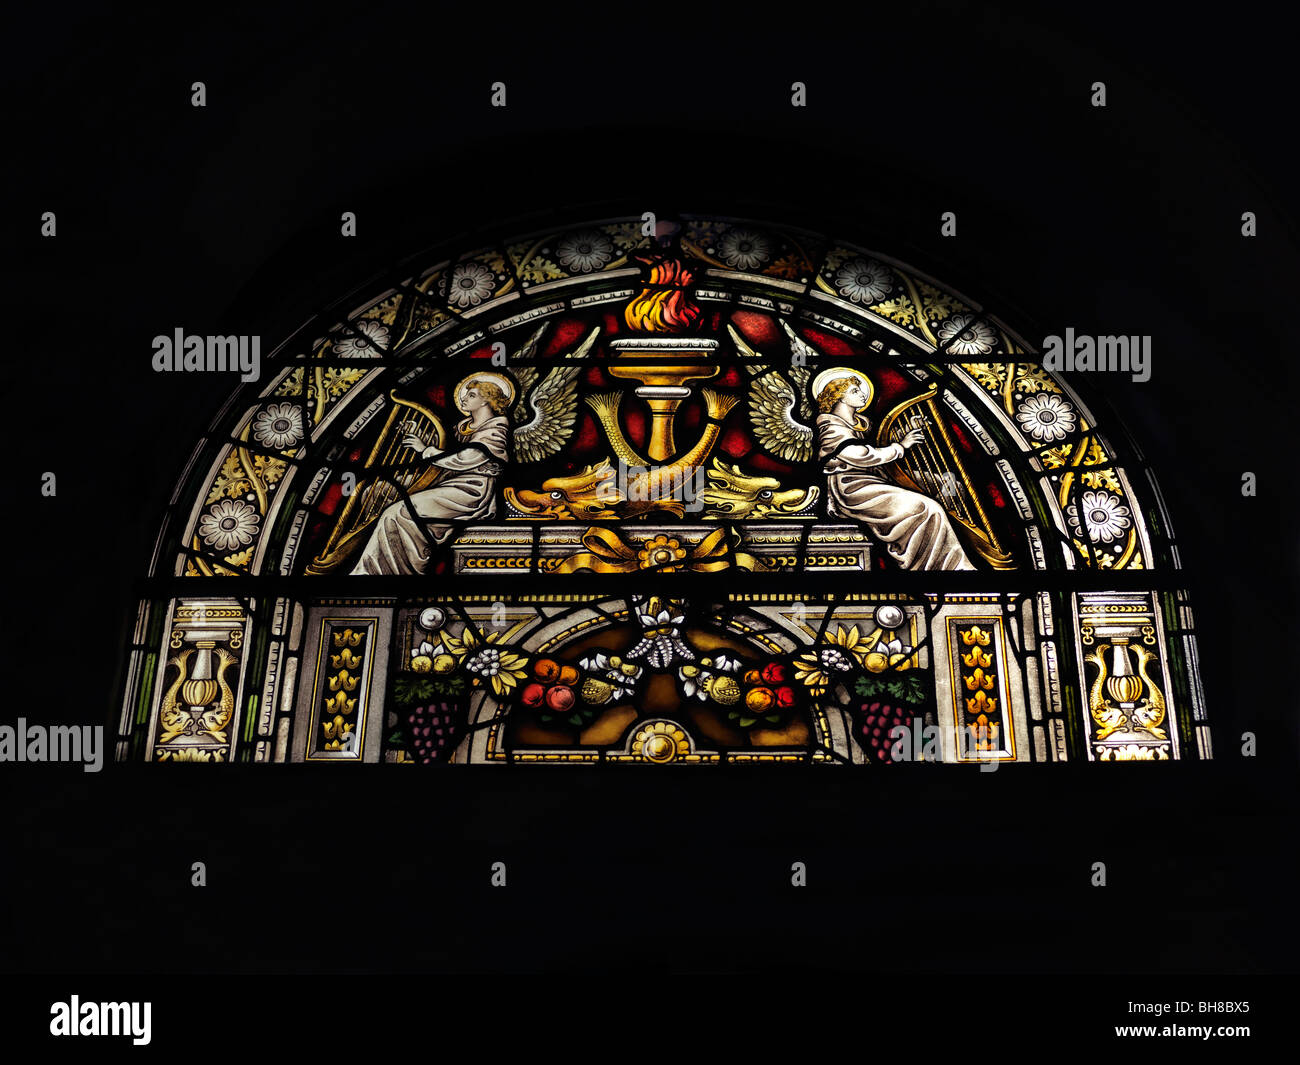 Wesley's Chapel City Road Islington London England Stained Glass Window Showing Angels Playing Harps and Dragon Fish Stock Photo